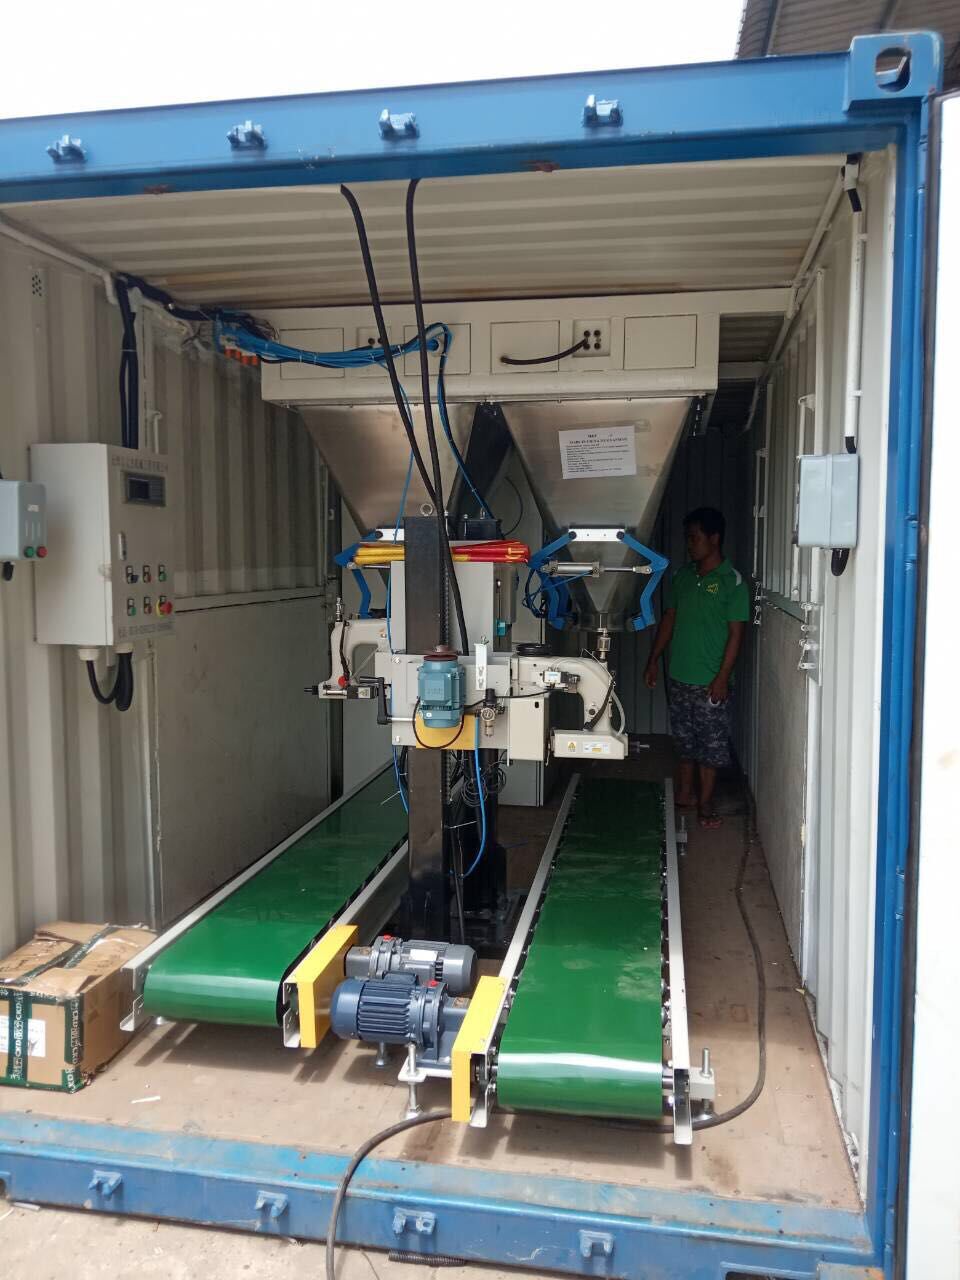 MOBILE FERTILIZERS BAGGING MACHINES containerized bagging system Mobile Bagging Unit MOBILE BAGGING MACHINES for Grains, pulses, iodised salts, sugar Containerised bagging system